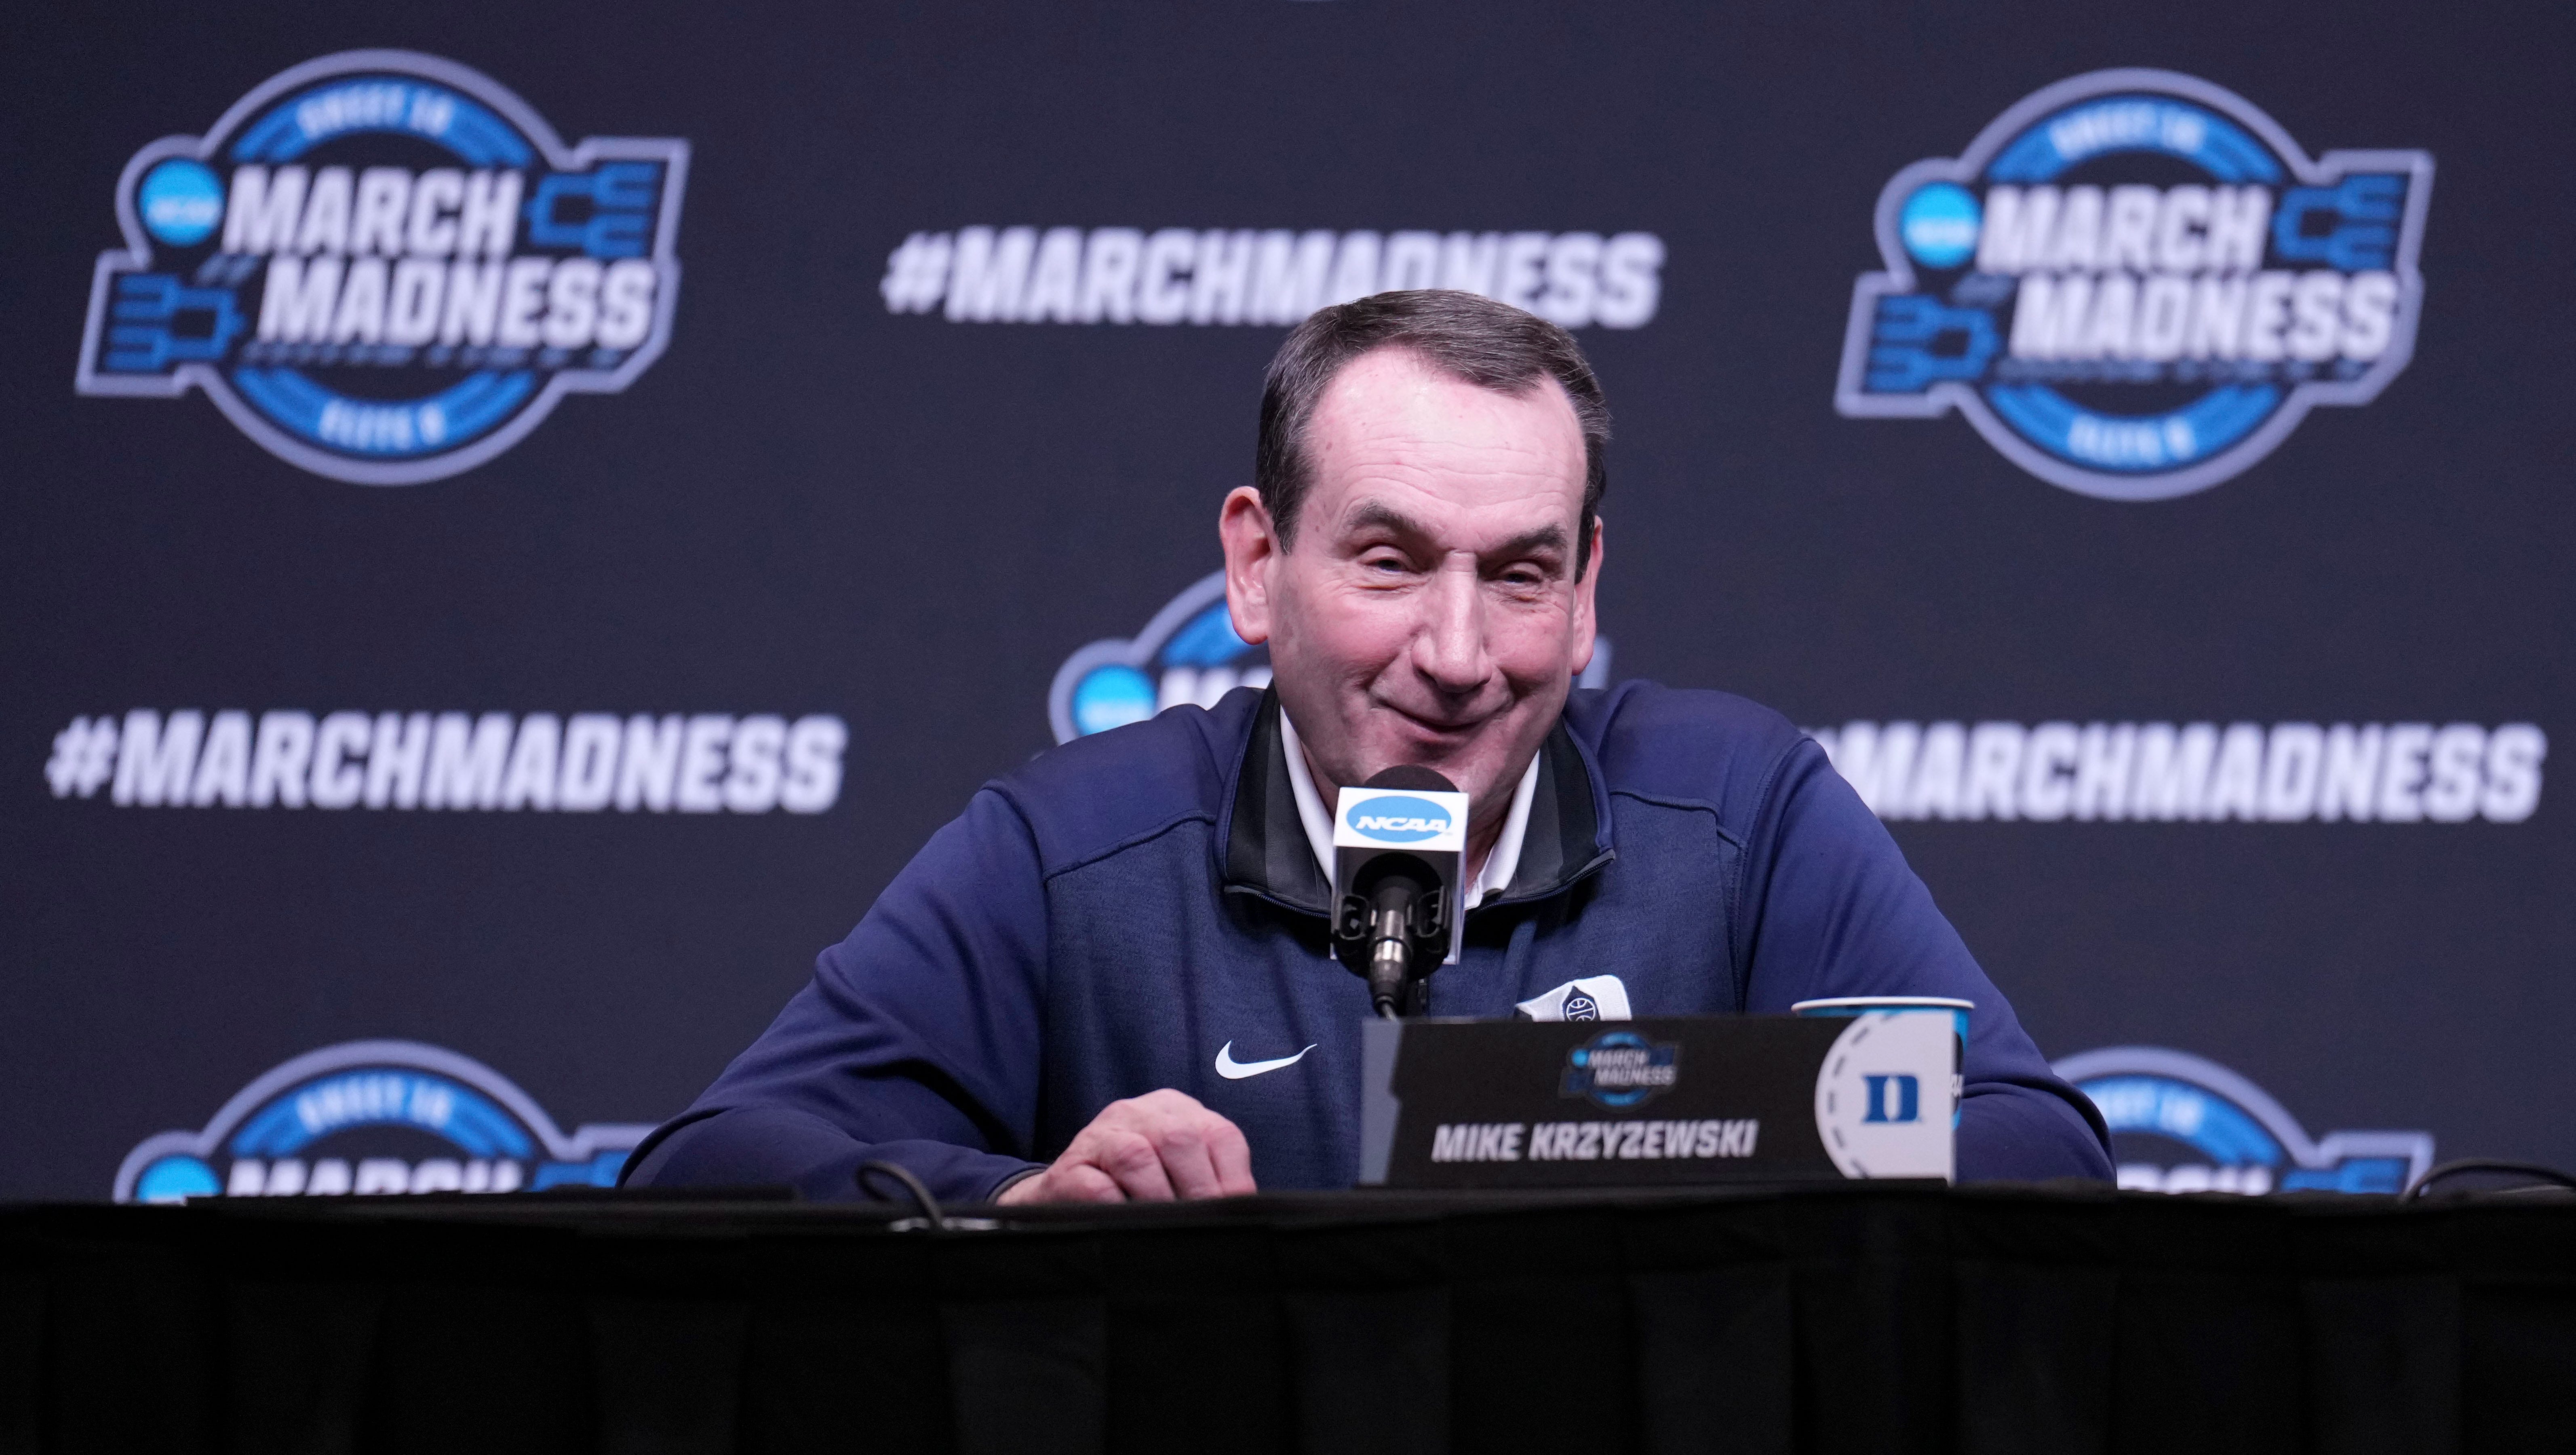 Coach K's career ends at Duke after loss to UNC in Final Four